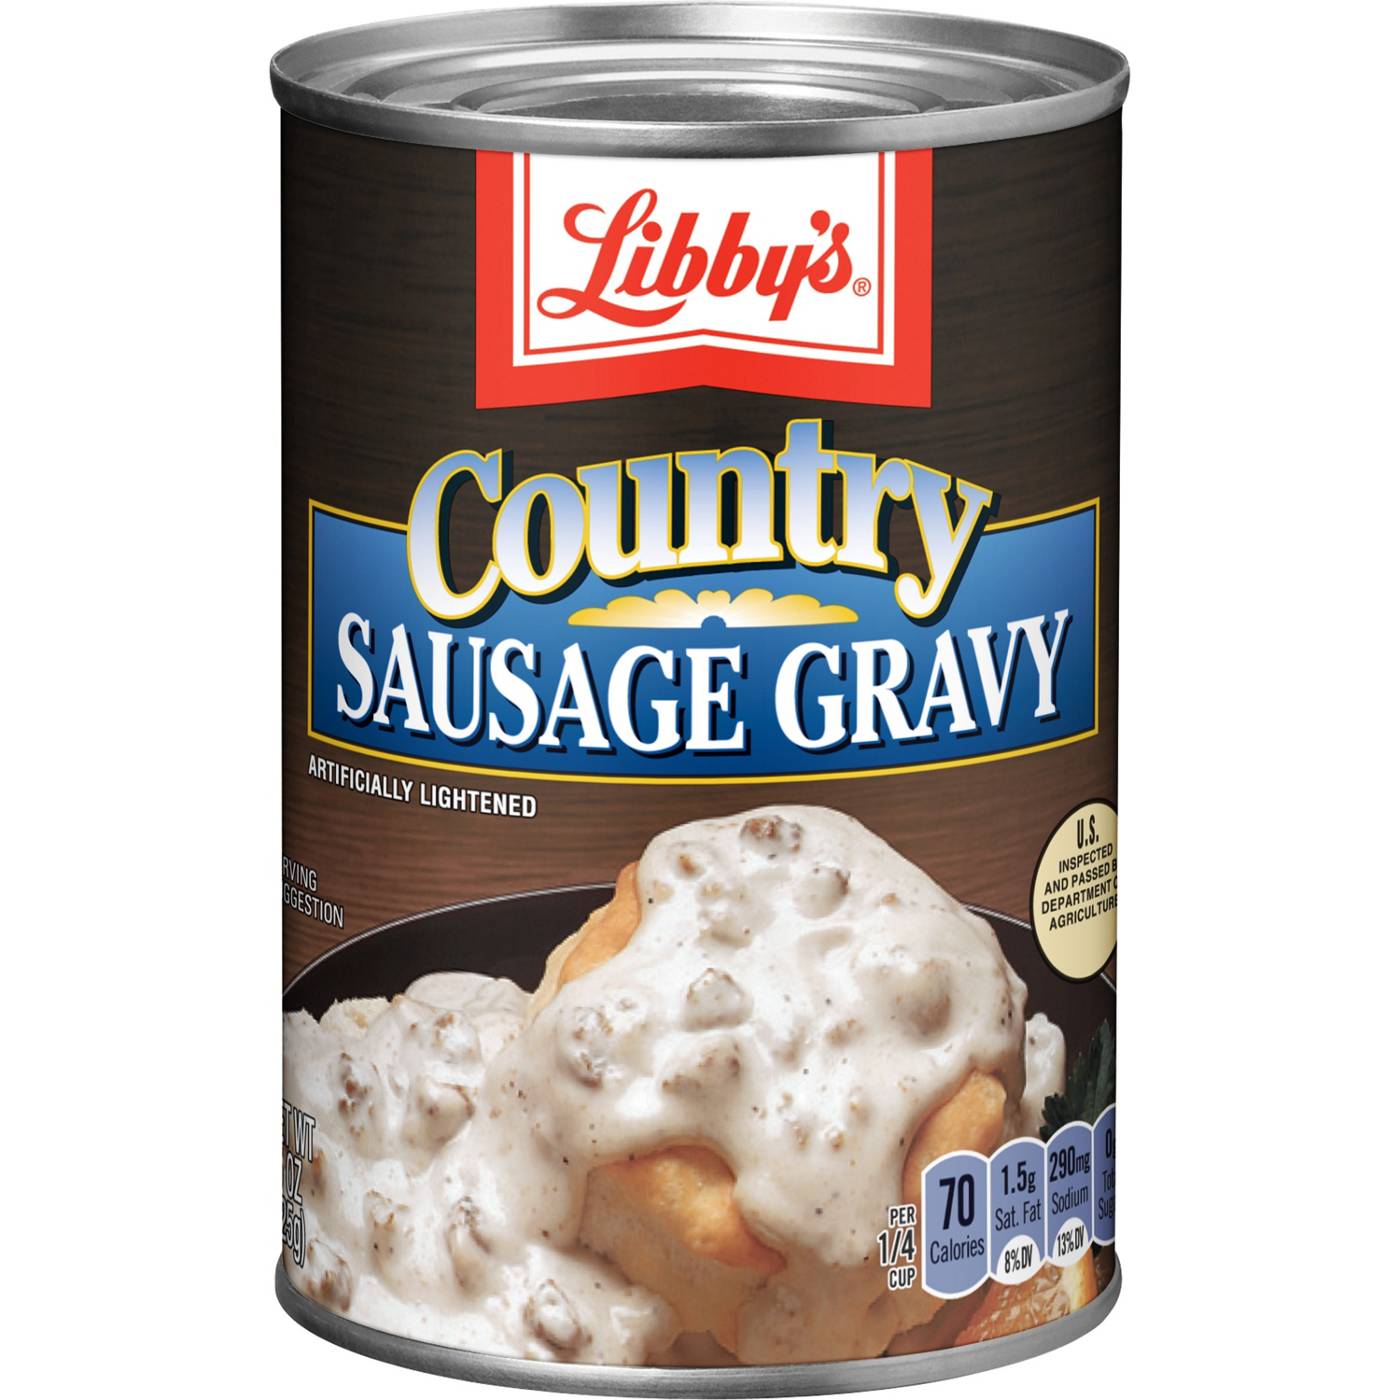 Libby's Country Sausage Gravy Canned Gravy; image 1 of 4